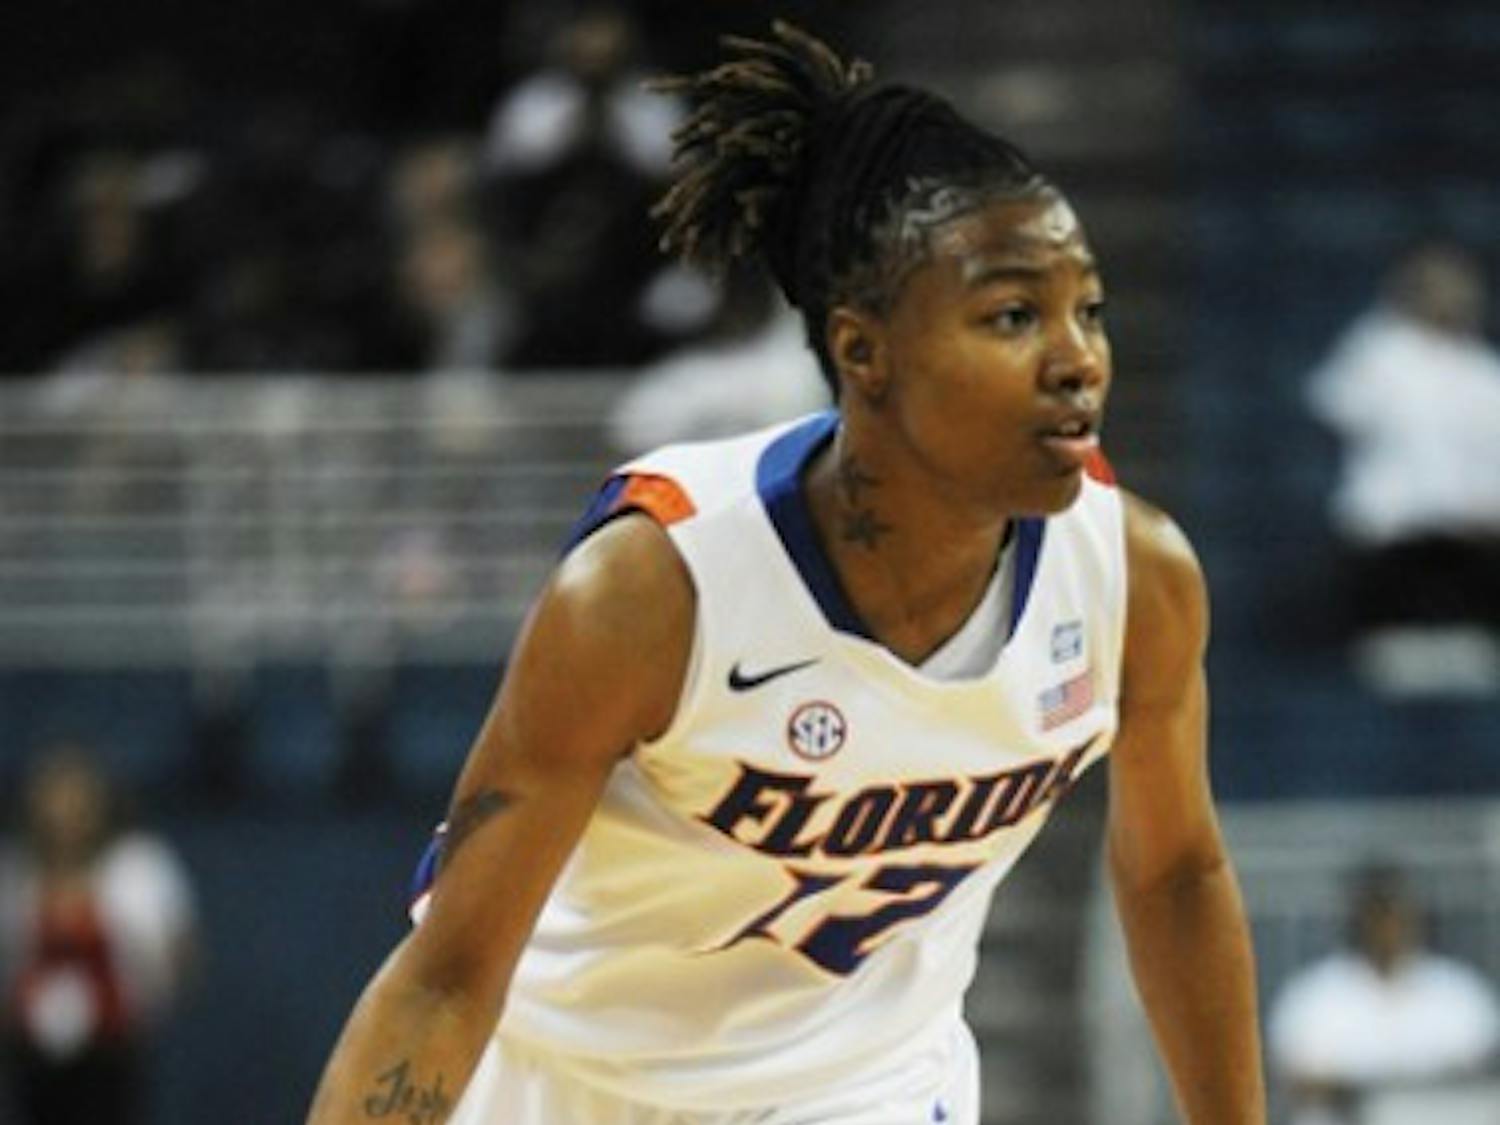 Senior guard Deana Allen said Florida is not new to anything this year. After having six newcomers join the team last season, the Gators struggled with turnovers.&nbsp;